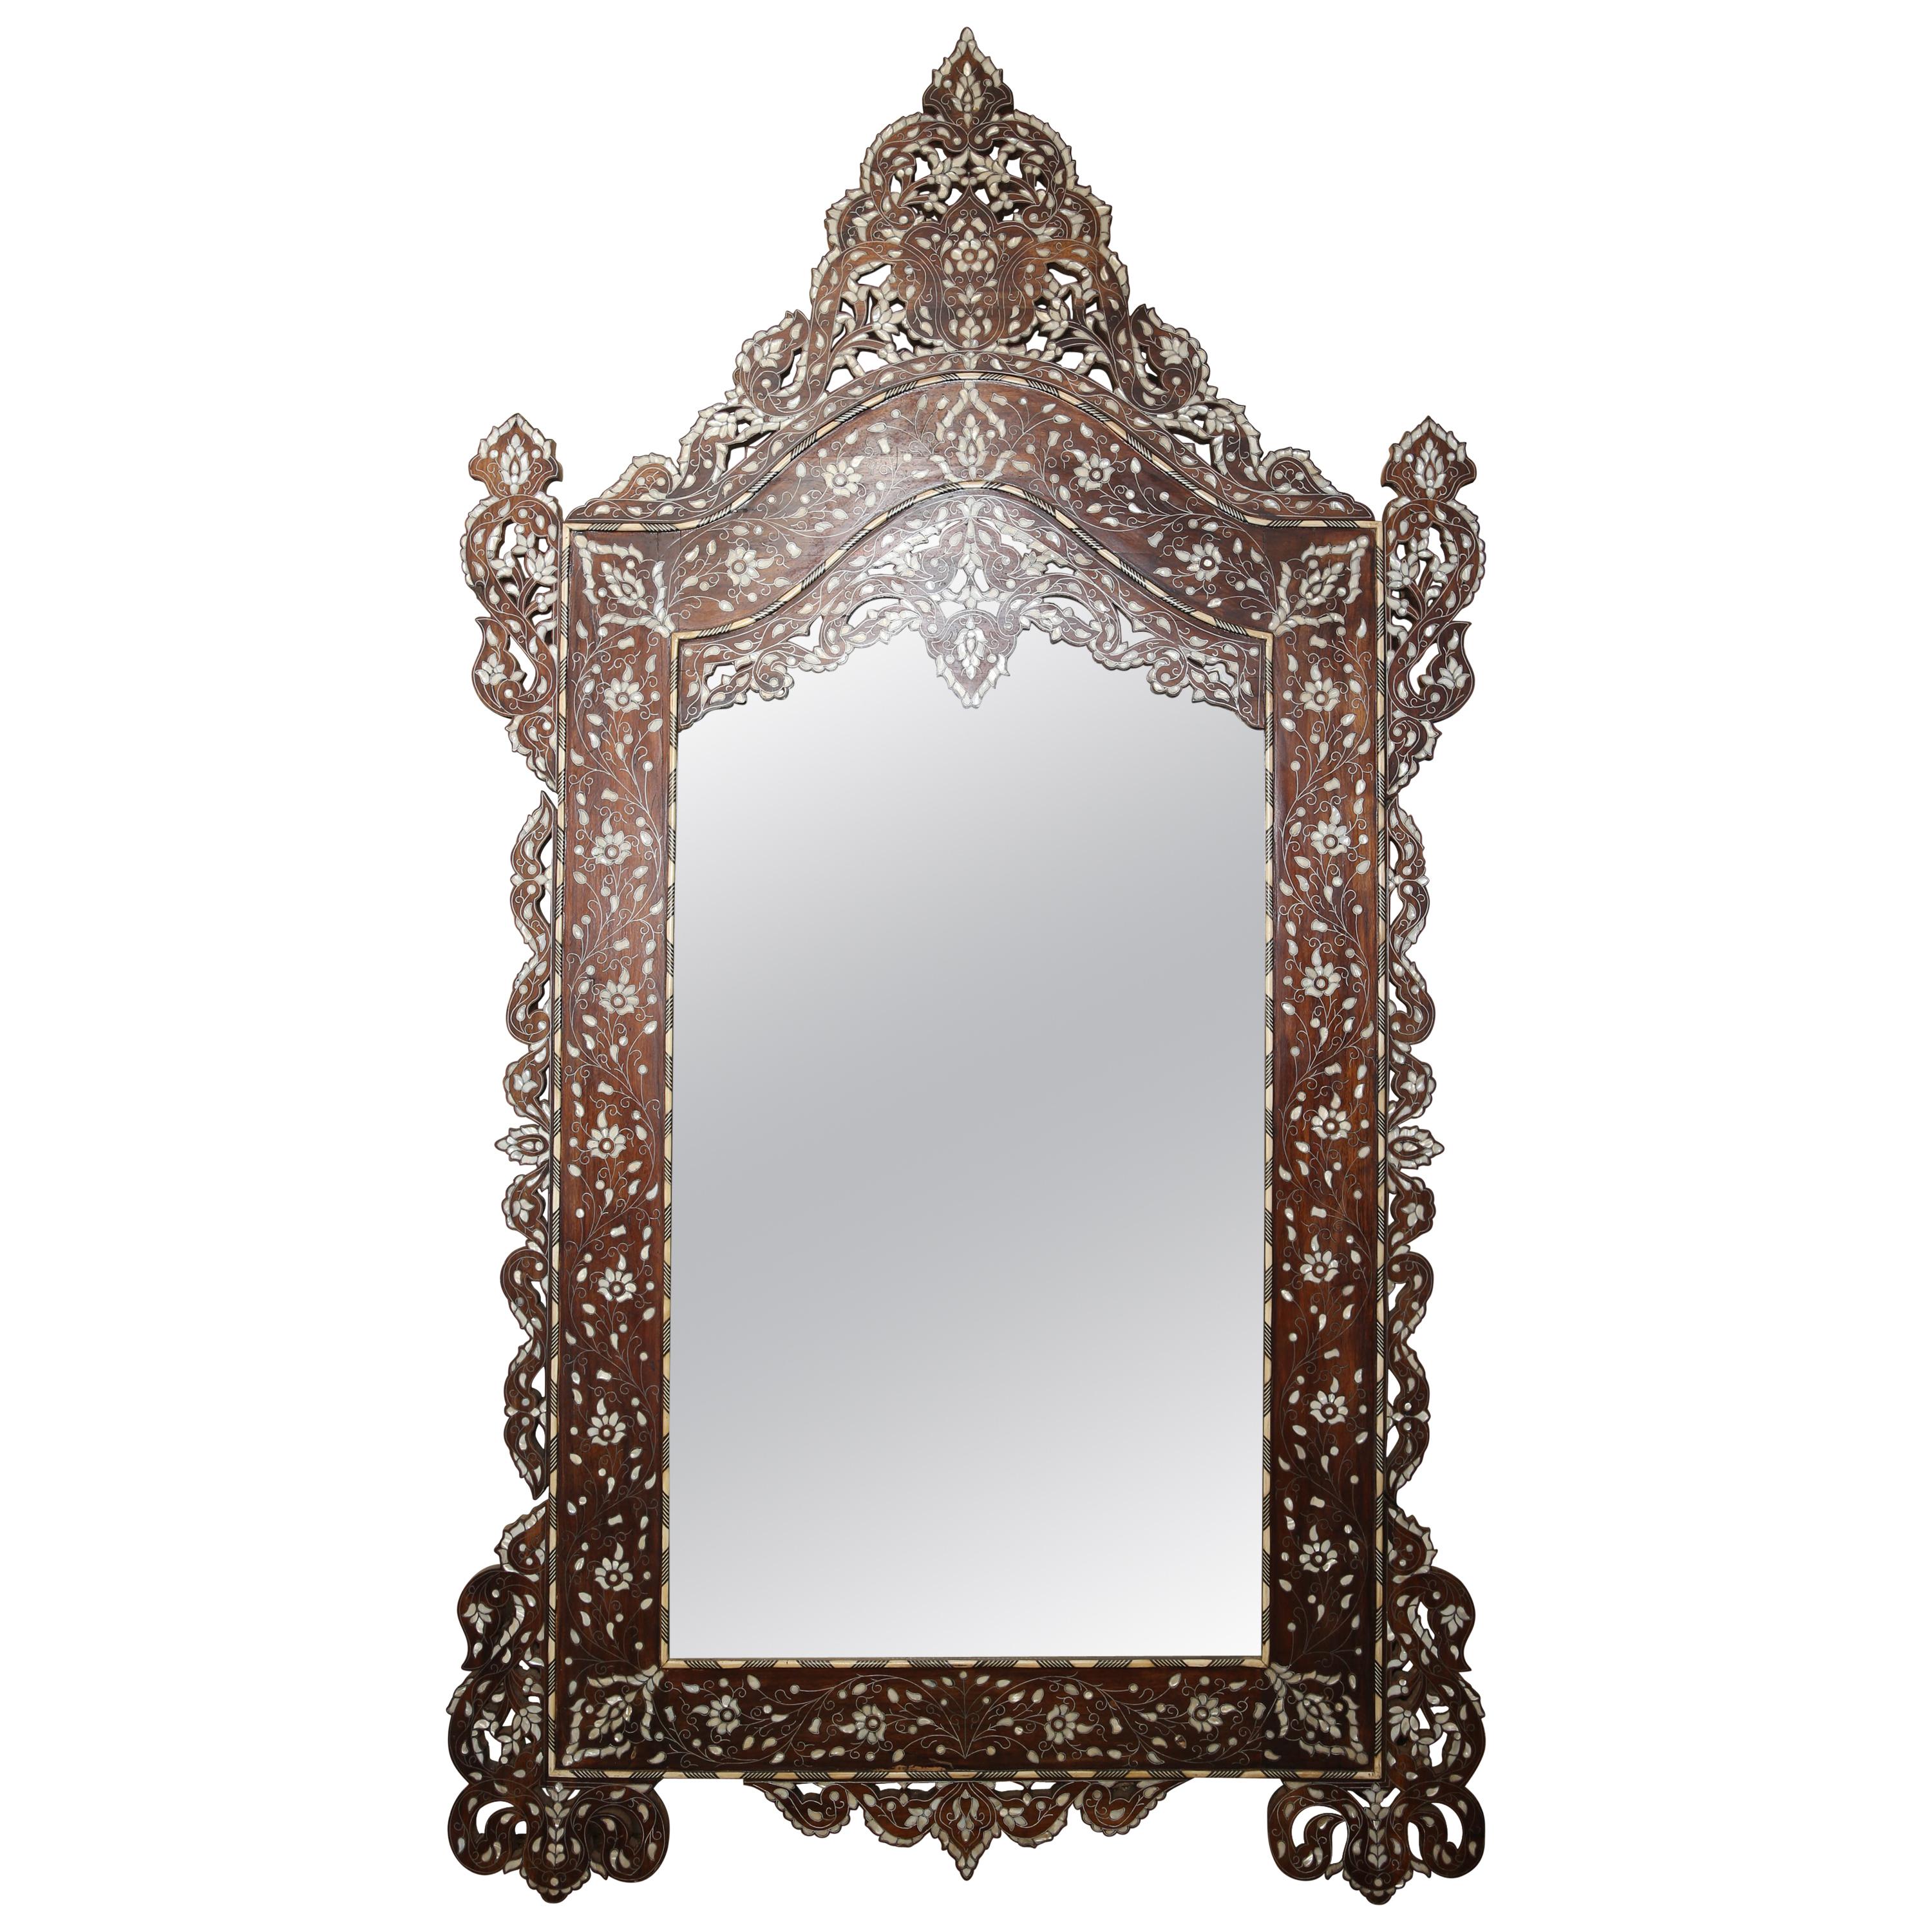 Superb 1900s Syrian Mirror Inlaid with Mother-of-Pearl and Camel Bone